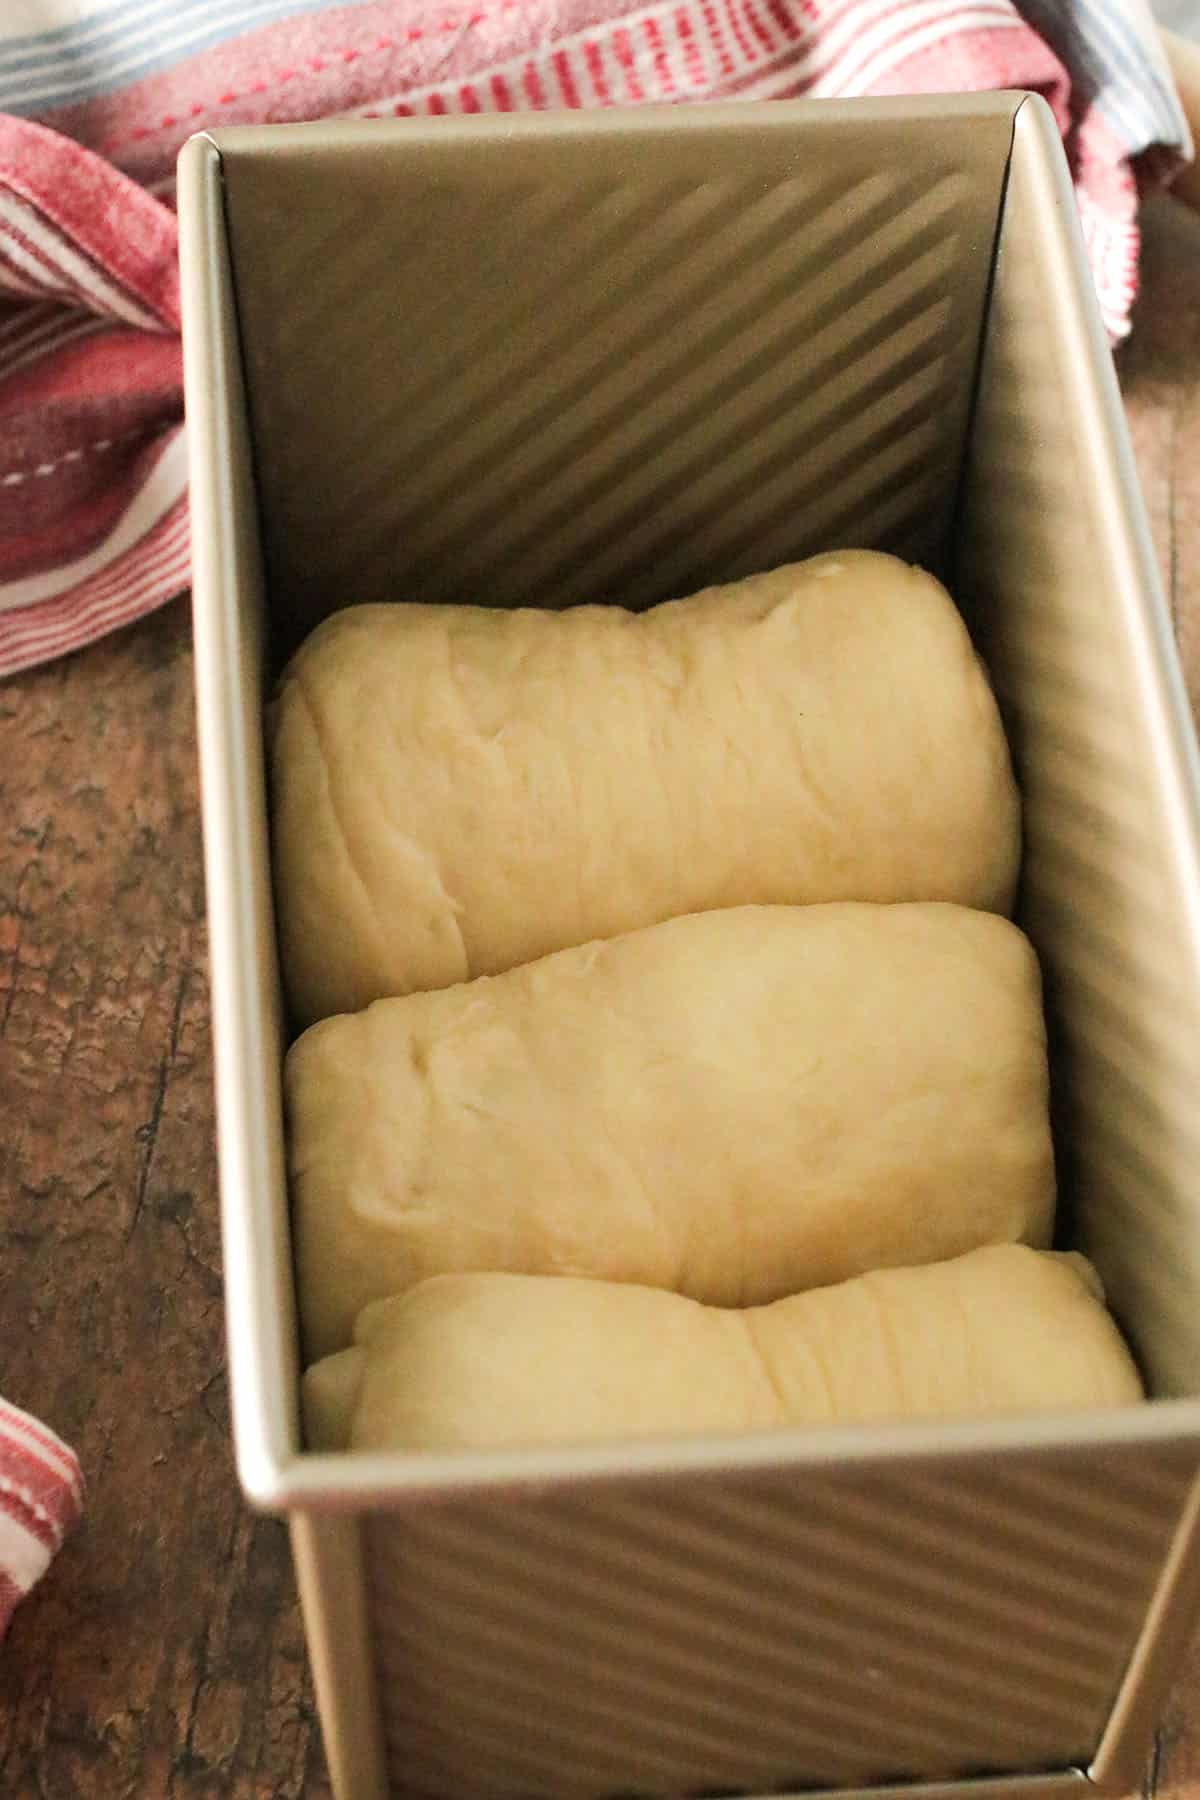 The logs of dough arranged in a Pullman loaf.